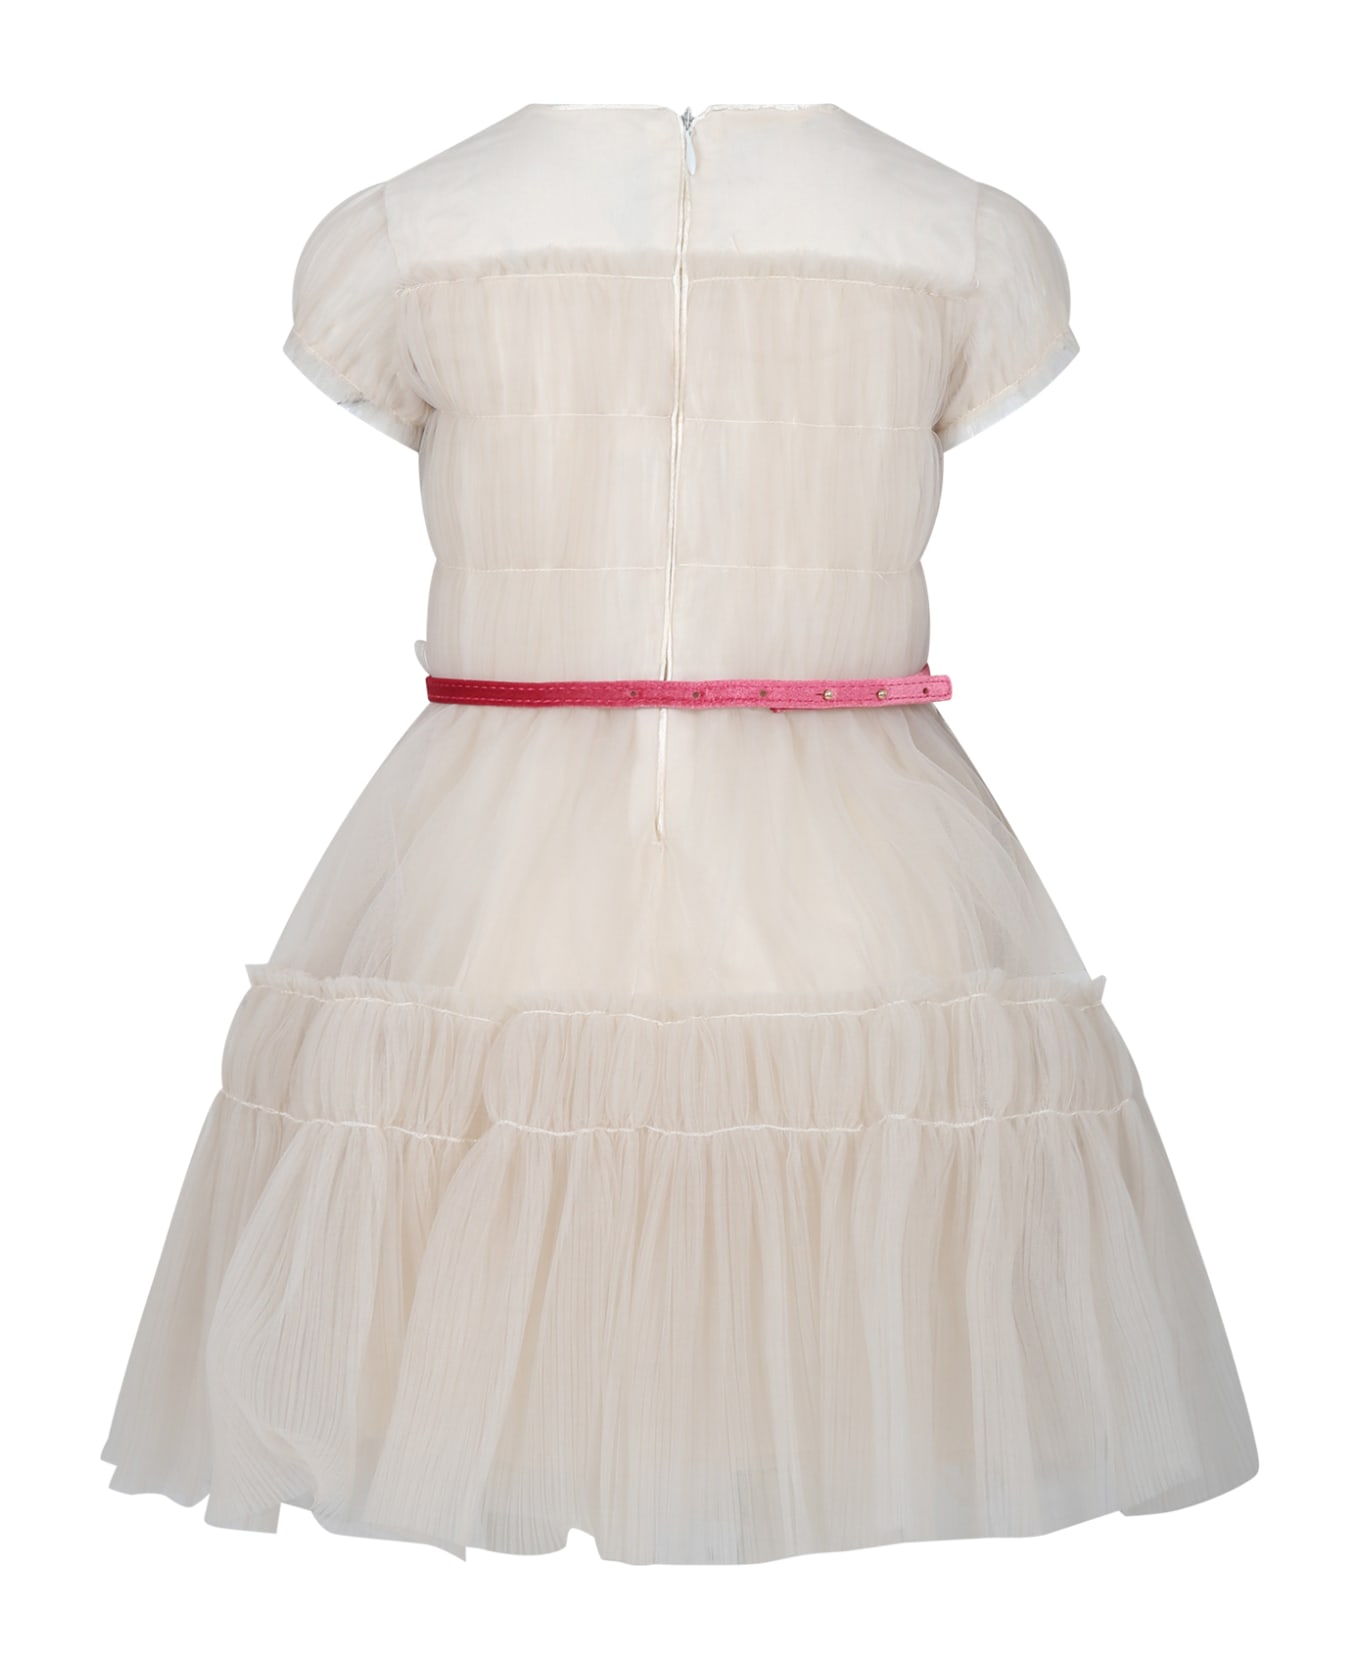 Monnalisa Ivory Dress For Girl With Flowers - Ivory